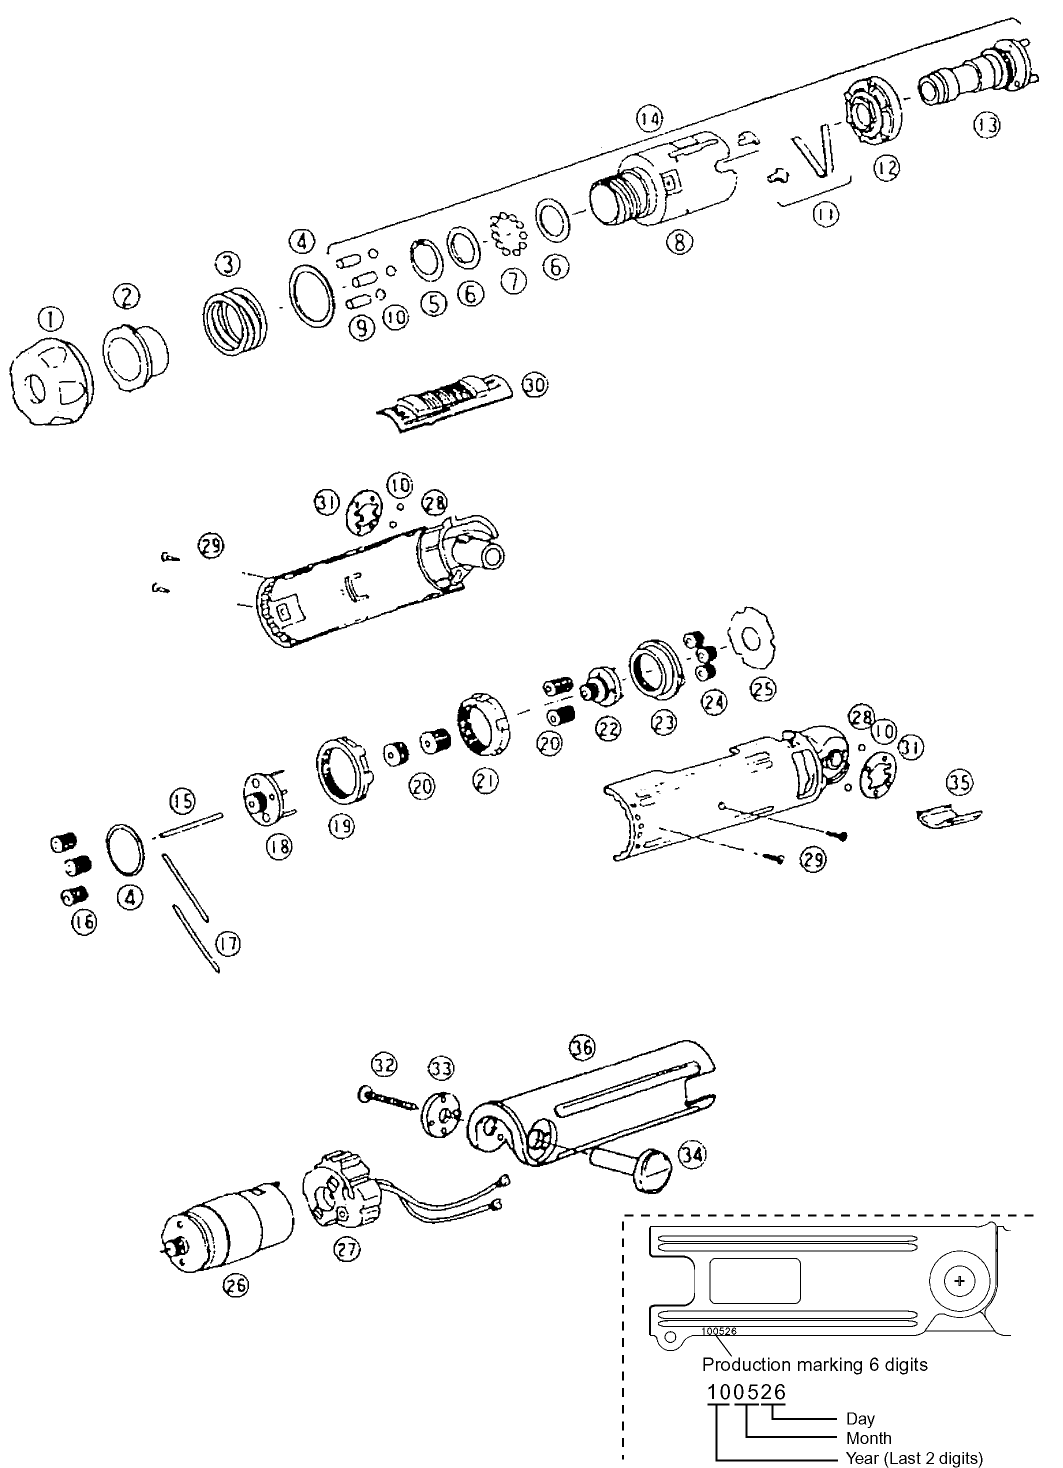 EY6220: Exploded View